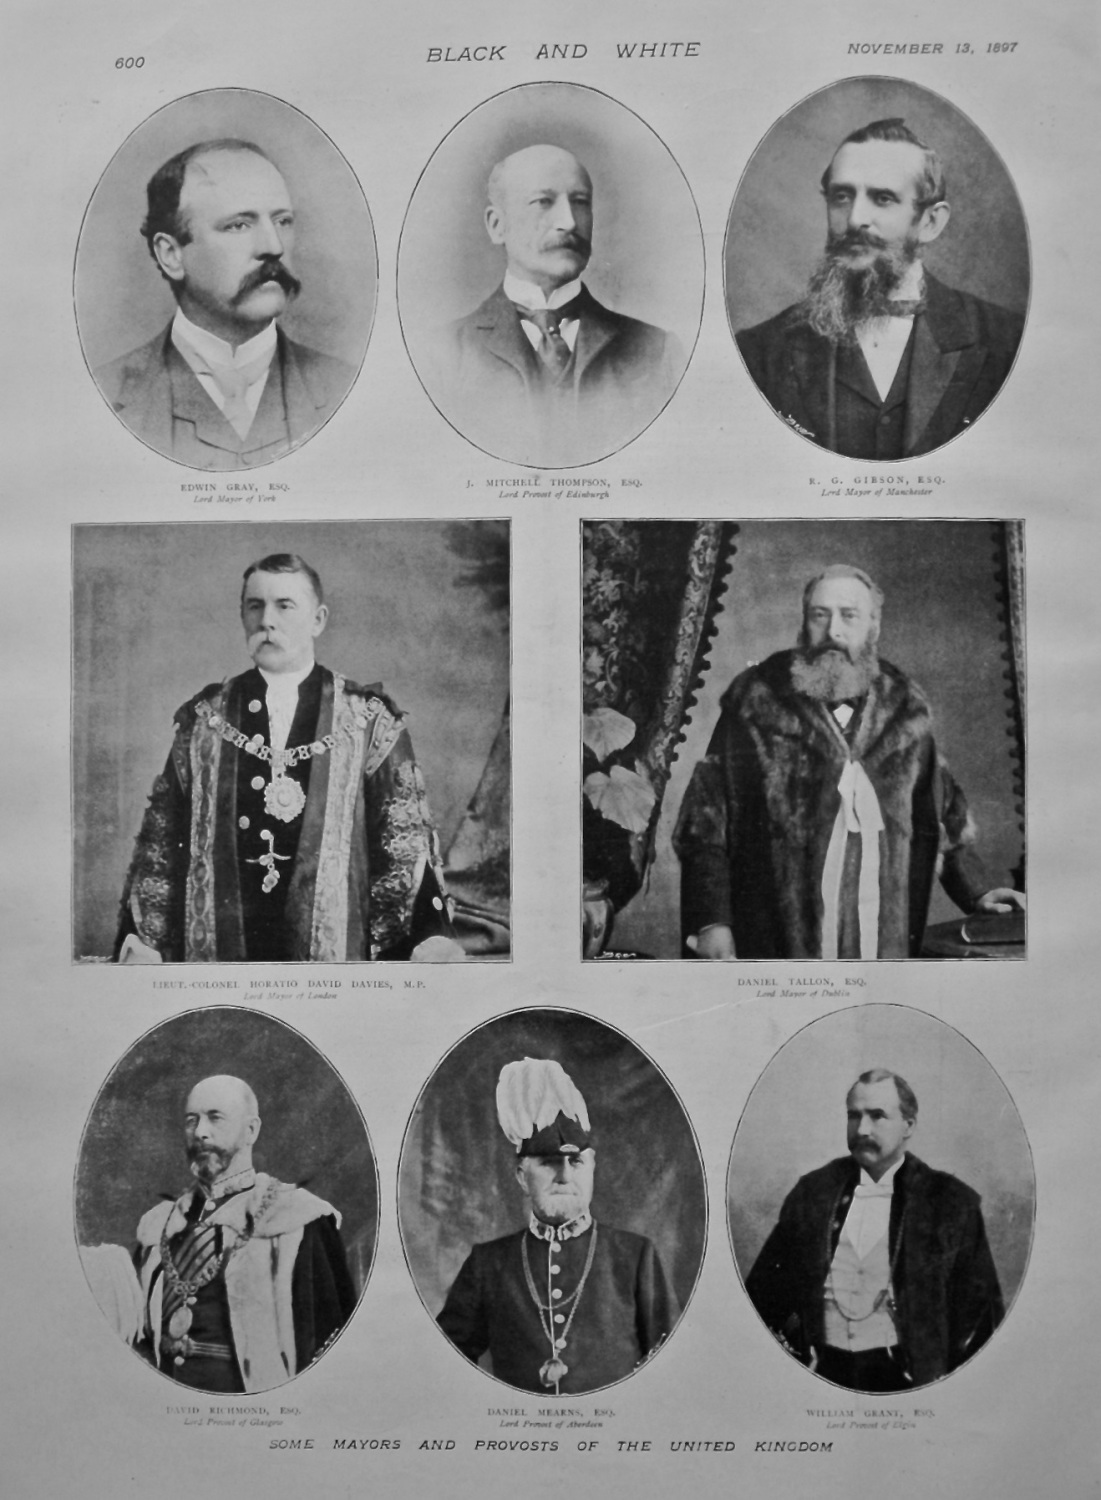 Some Mayors and Provosts of the United Kingdom. 1897.